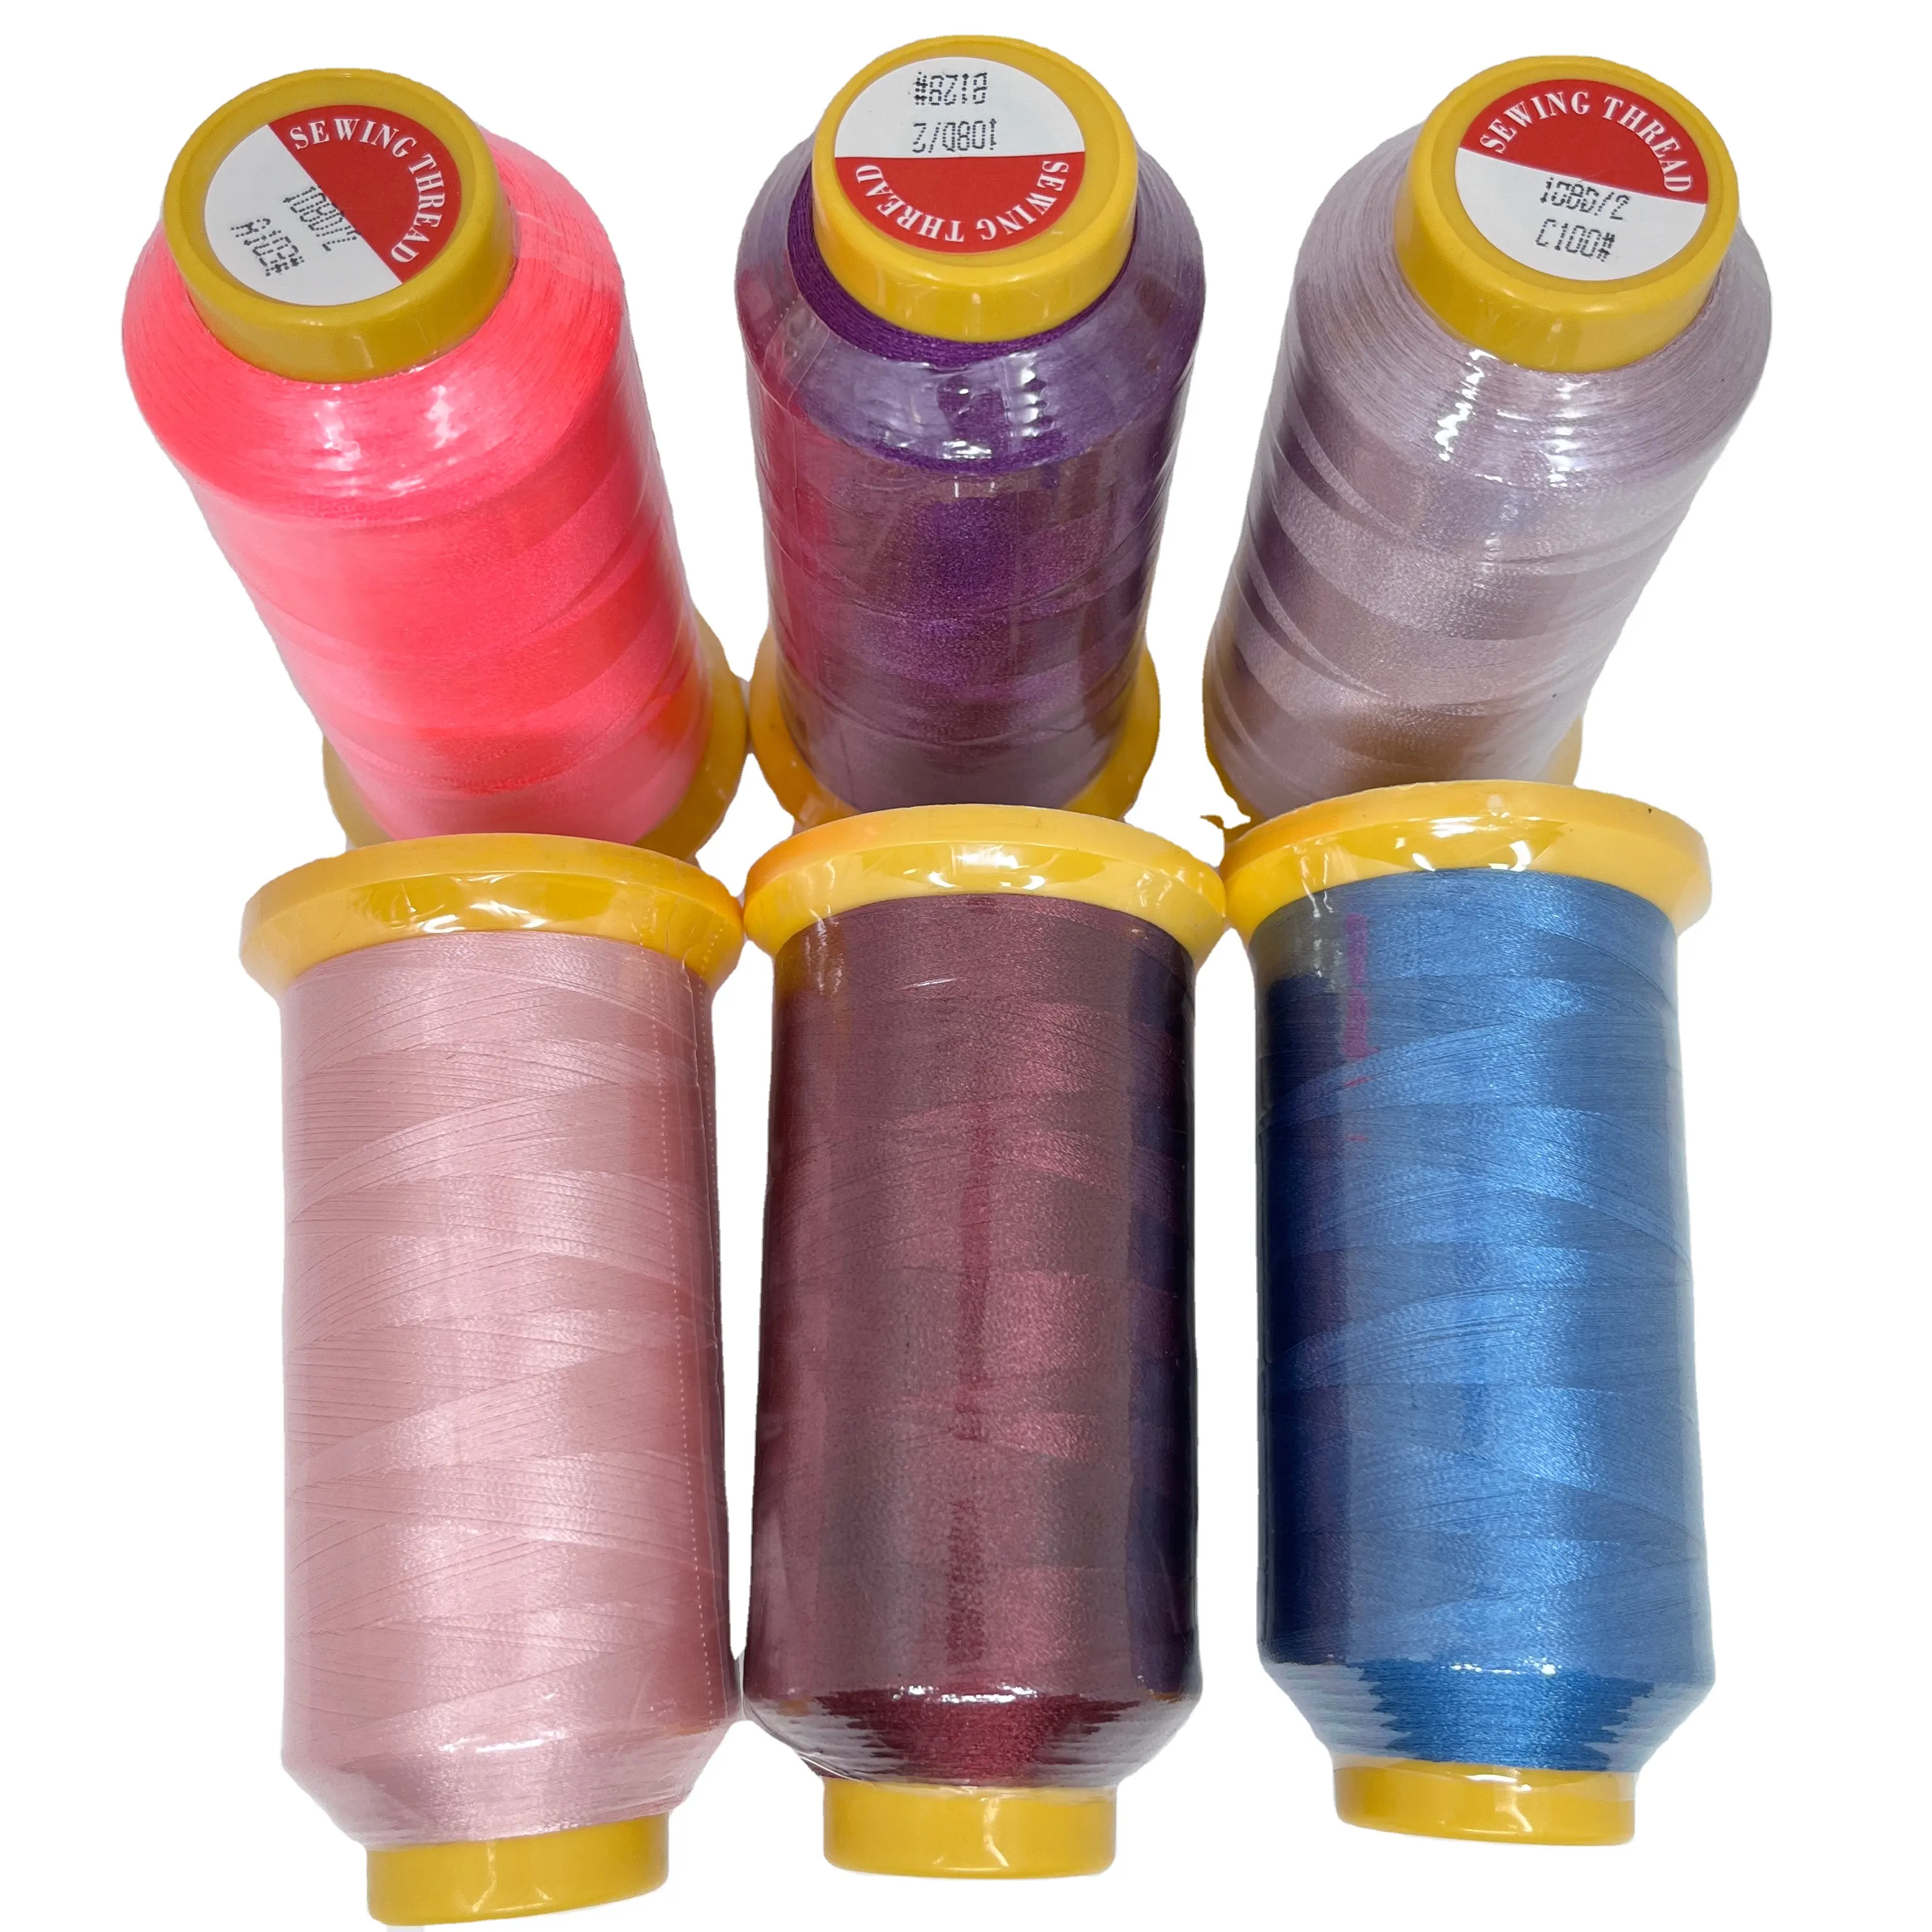 China factory directly provide high tenacity polyester bonded thread with better breaking strength